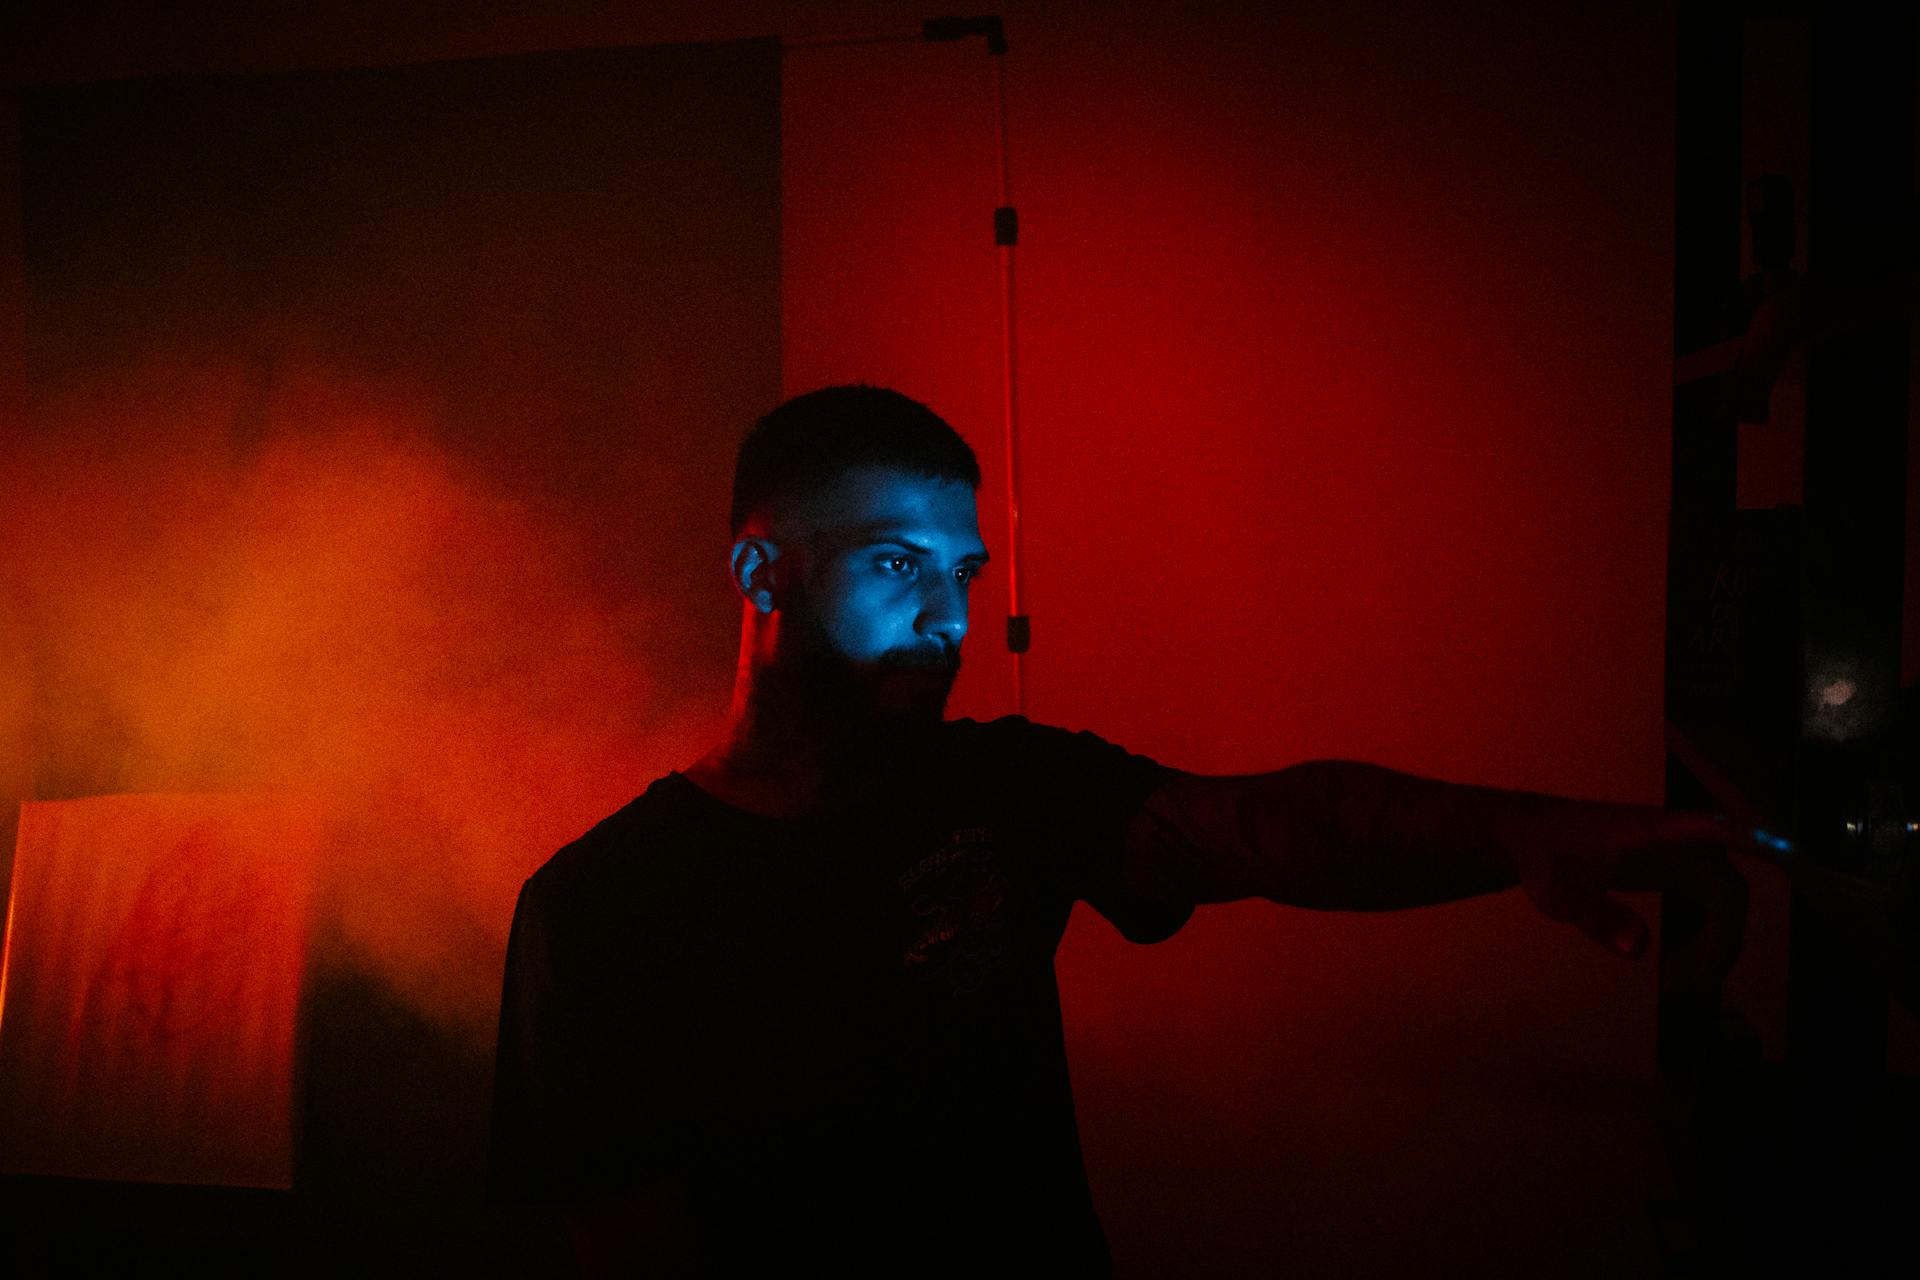 Concentrated male with eyes lightened by multimedia projector standing in dark room with red illumination